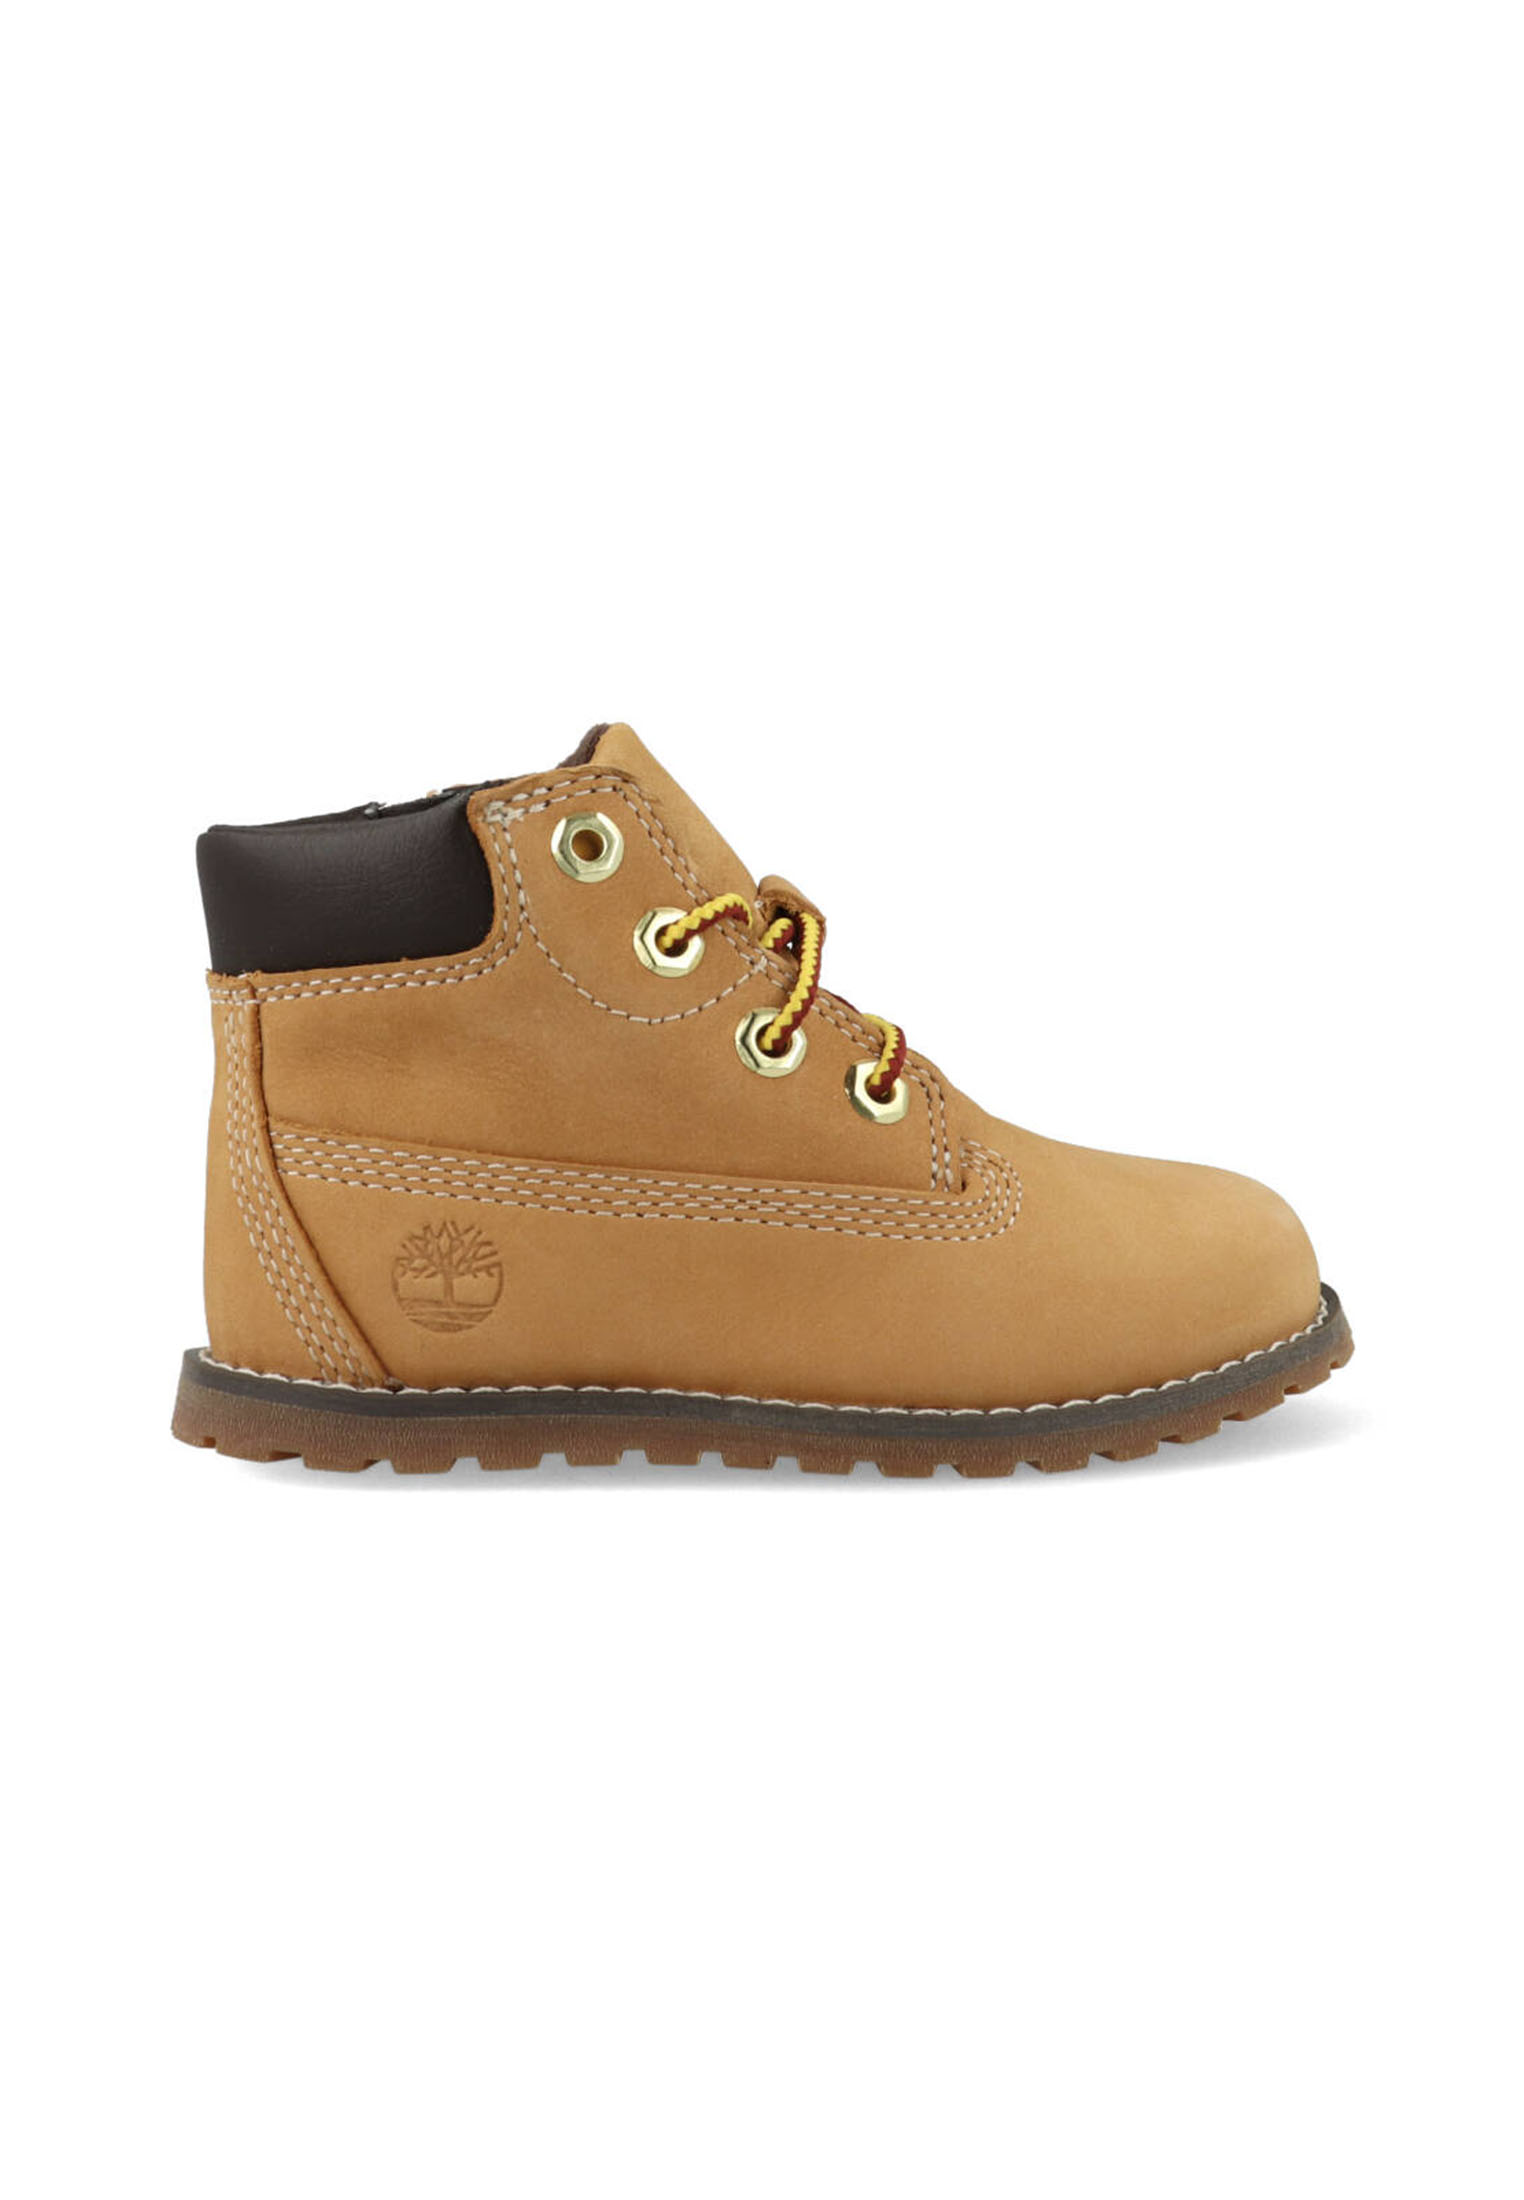 Timberland Pokey Pine 6 inch Boots A125Q Bruin 24 maat 24